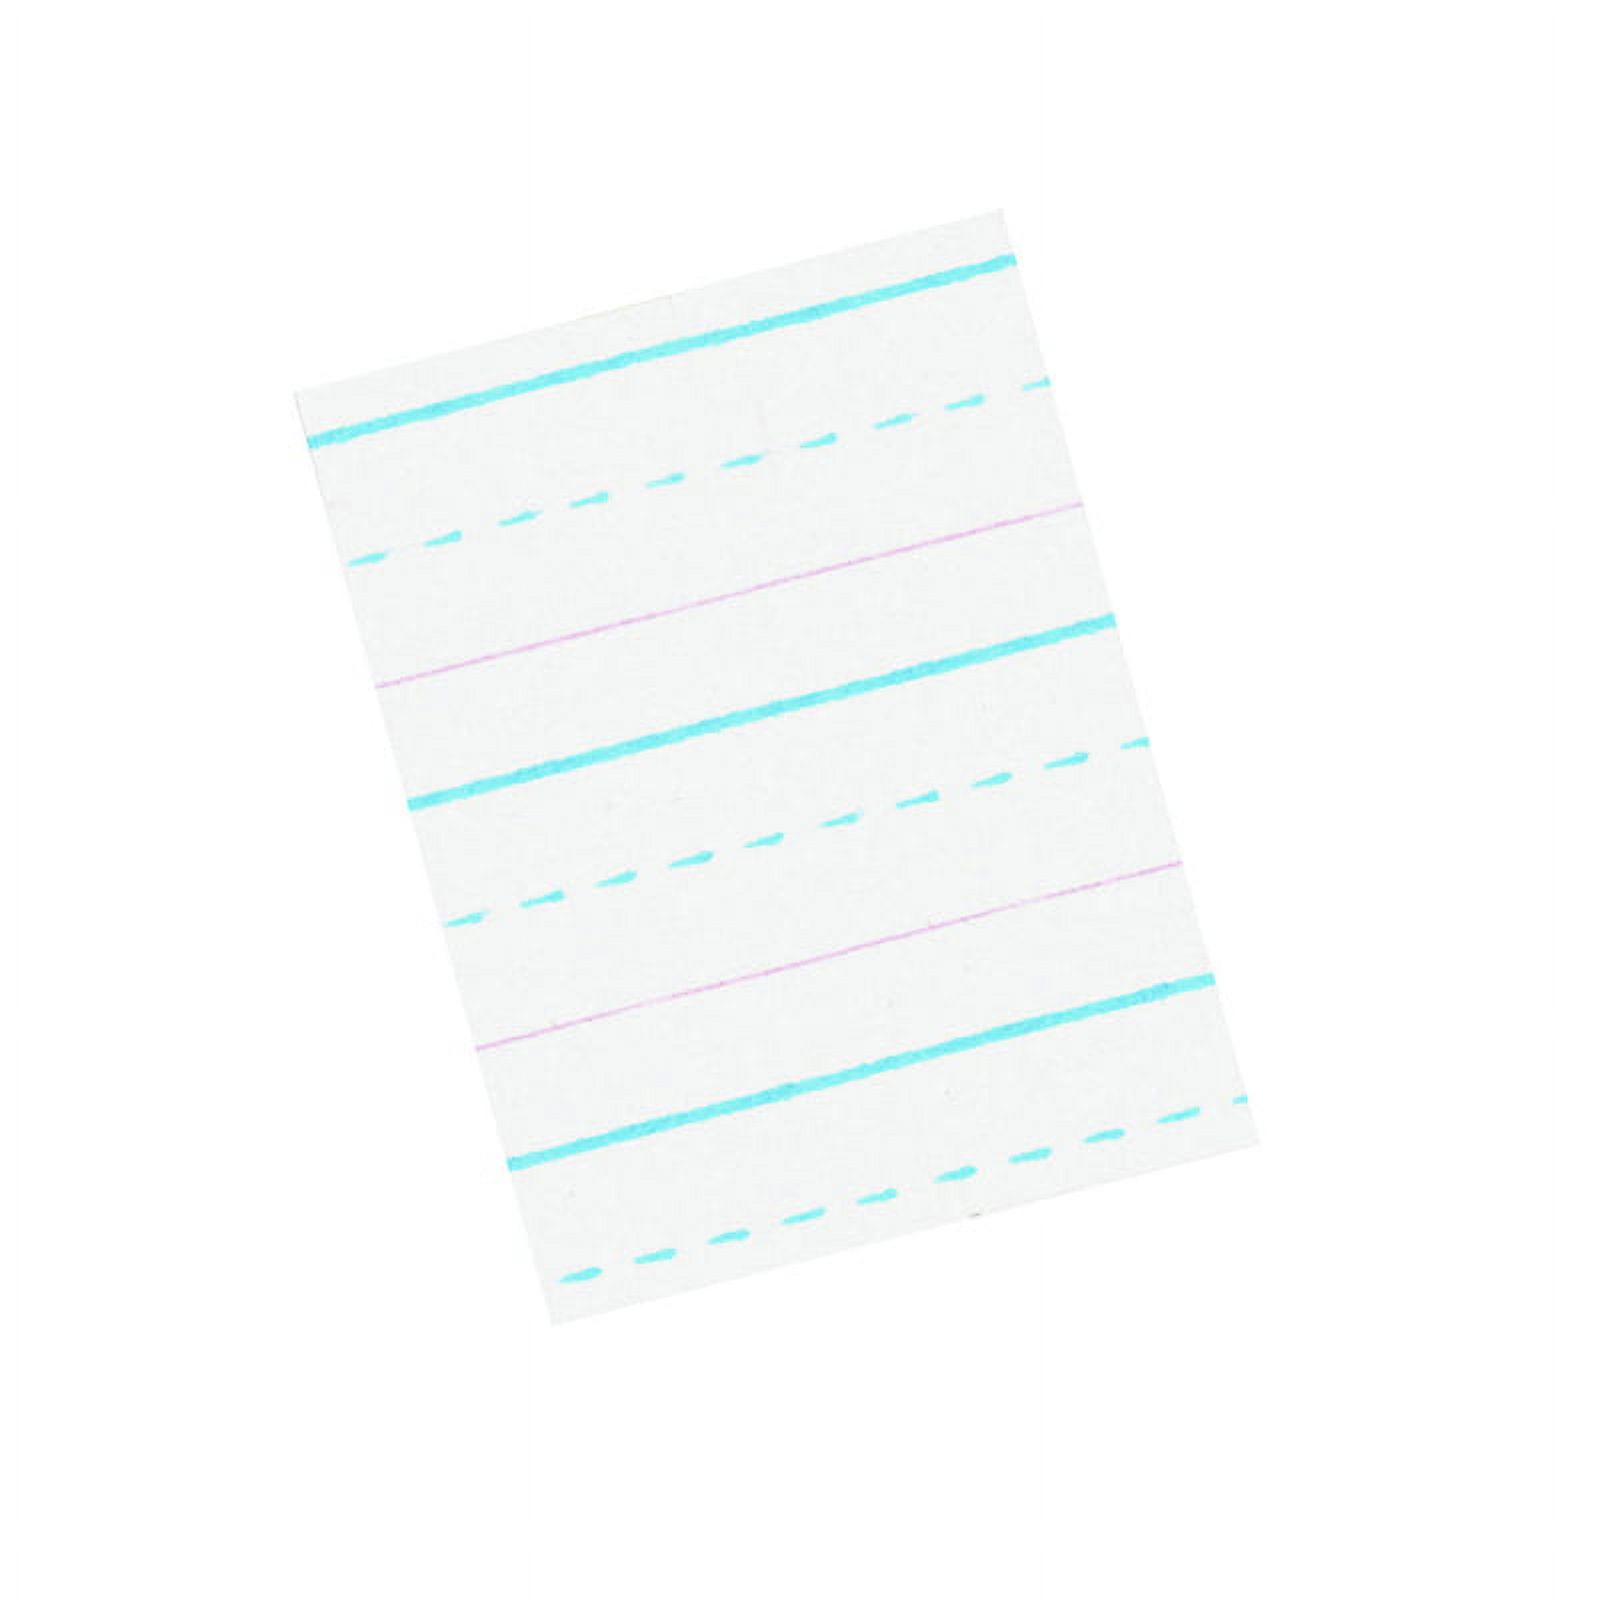 Zaner-Bloser, Sulphite Handwriting Paper, Dotted Midline, Grade 2, 1/2" x 1/4" x 1/4" Ruled Long, 10-1/2" x 8", 500 Sheets | Bundle of 10 Packs, White - image 1 of 1